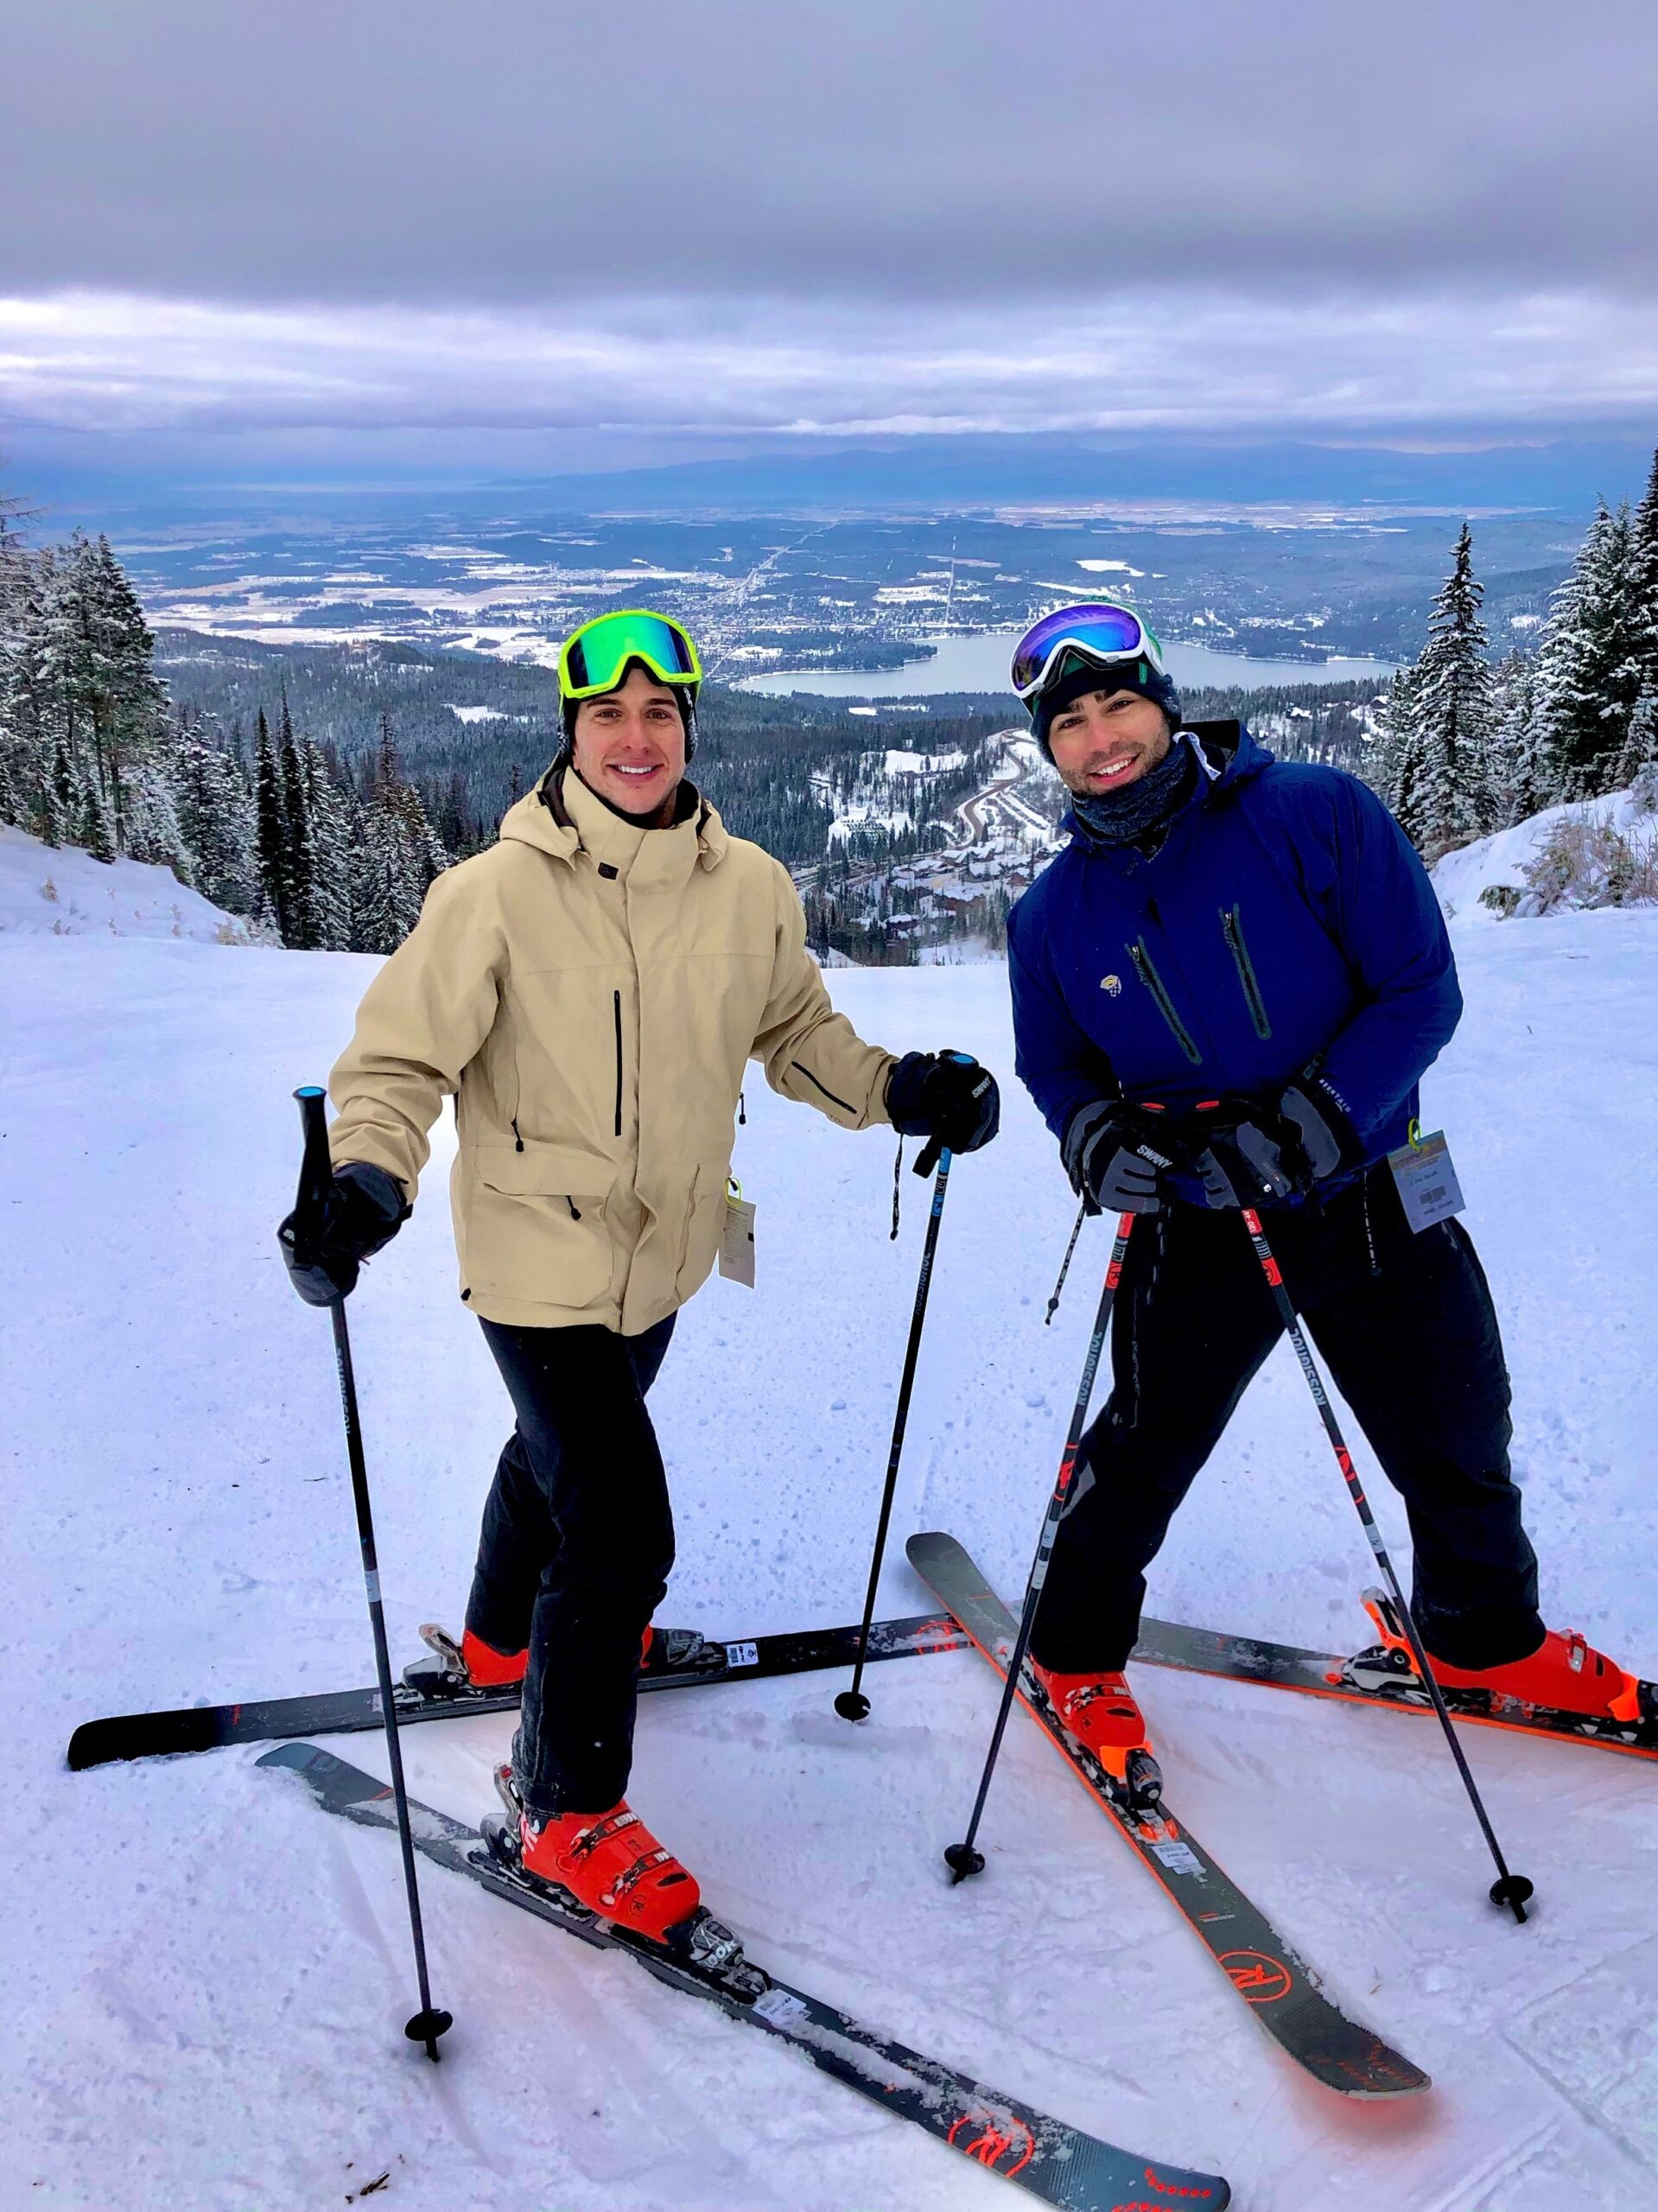 Parker Smith (left) with his boyfriend Christian (right) in Whitefish, Montana (Photo Credit: @its_parkersmith on Instagram)